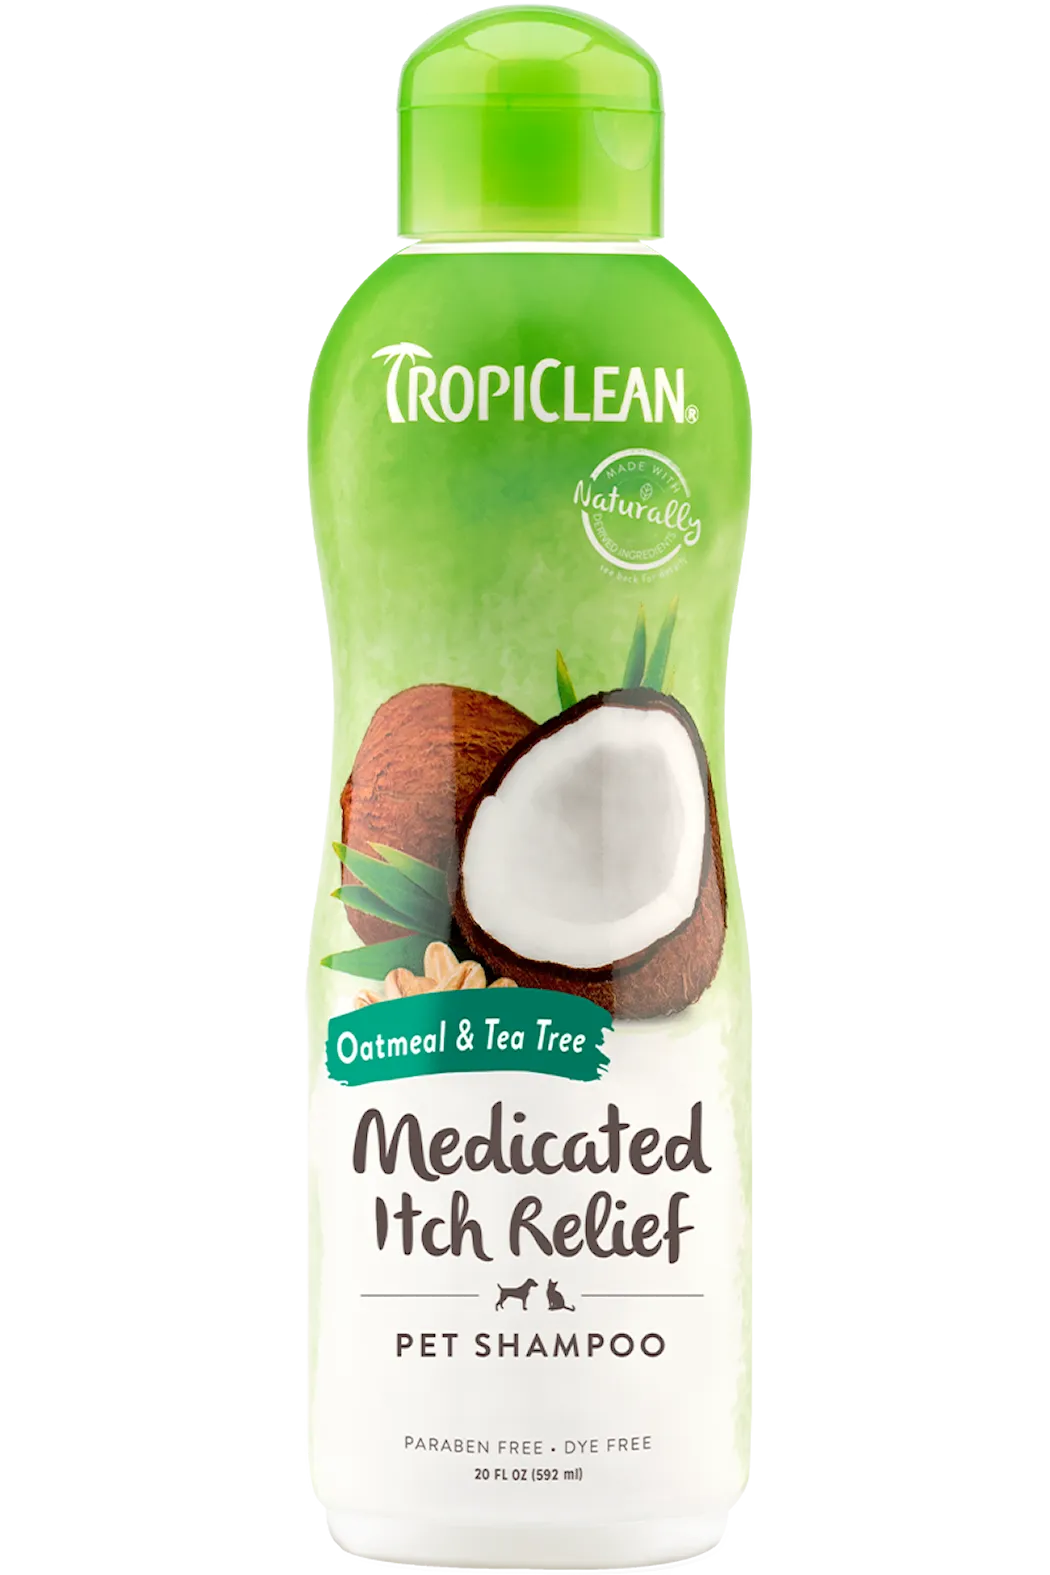 TropiClean Oatmeal & Tea Tree Medicated Itch Relief Shampoo for Pets 355 ml